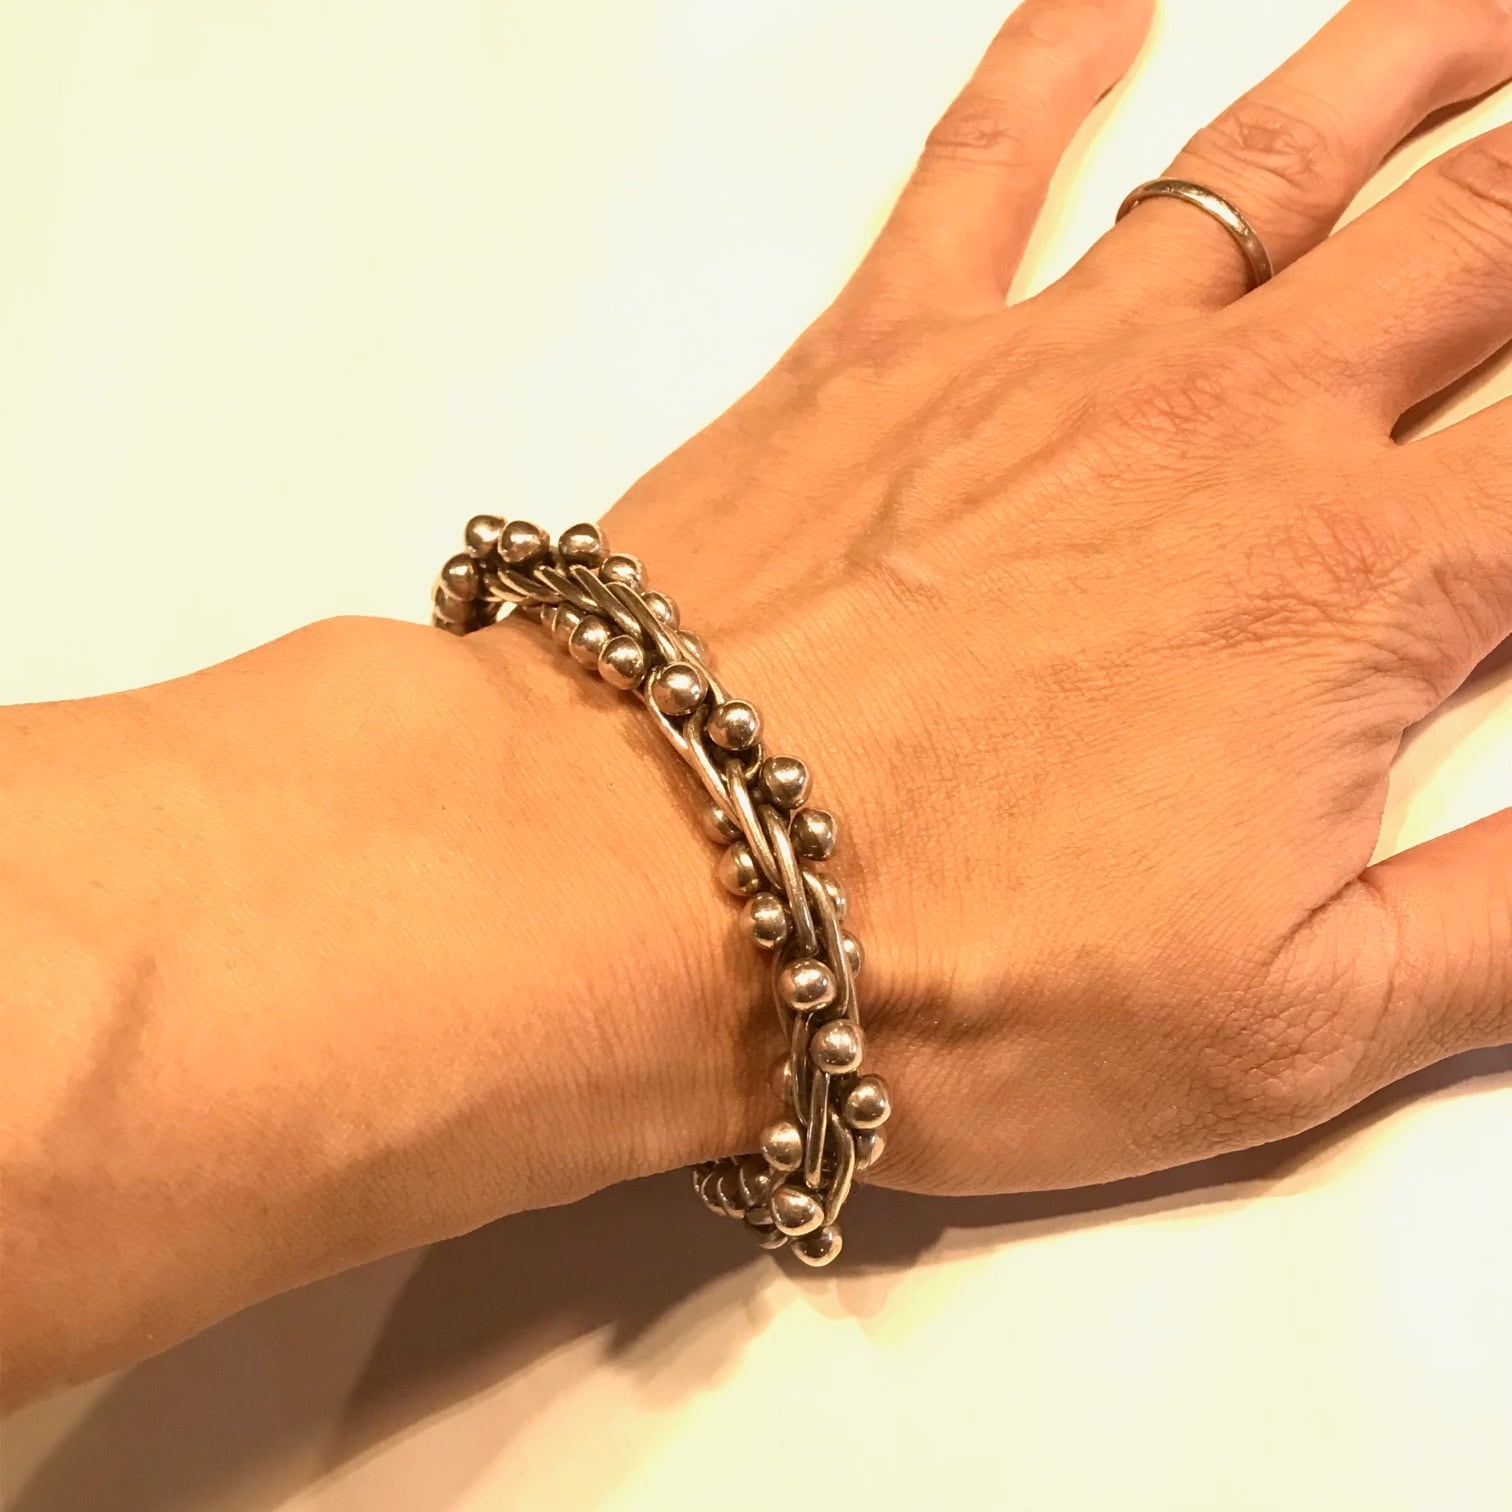 Vintage TAXCO Mexican Silver DNA Toggle Bracelet